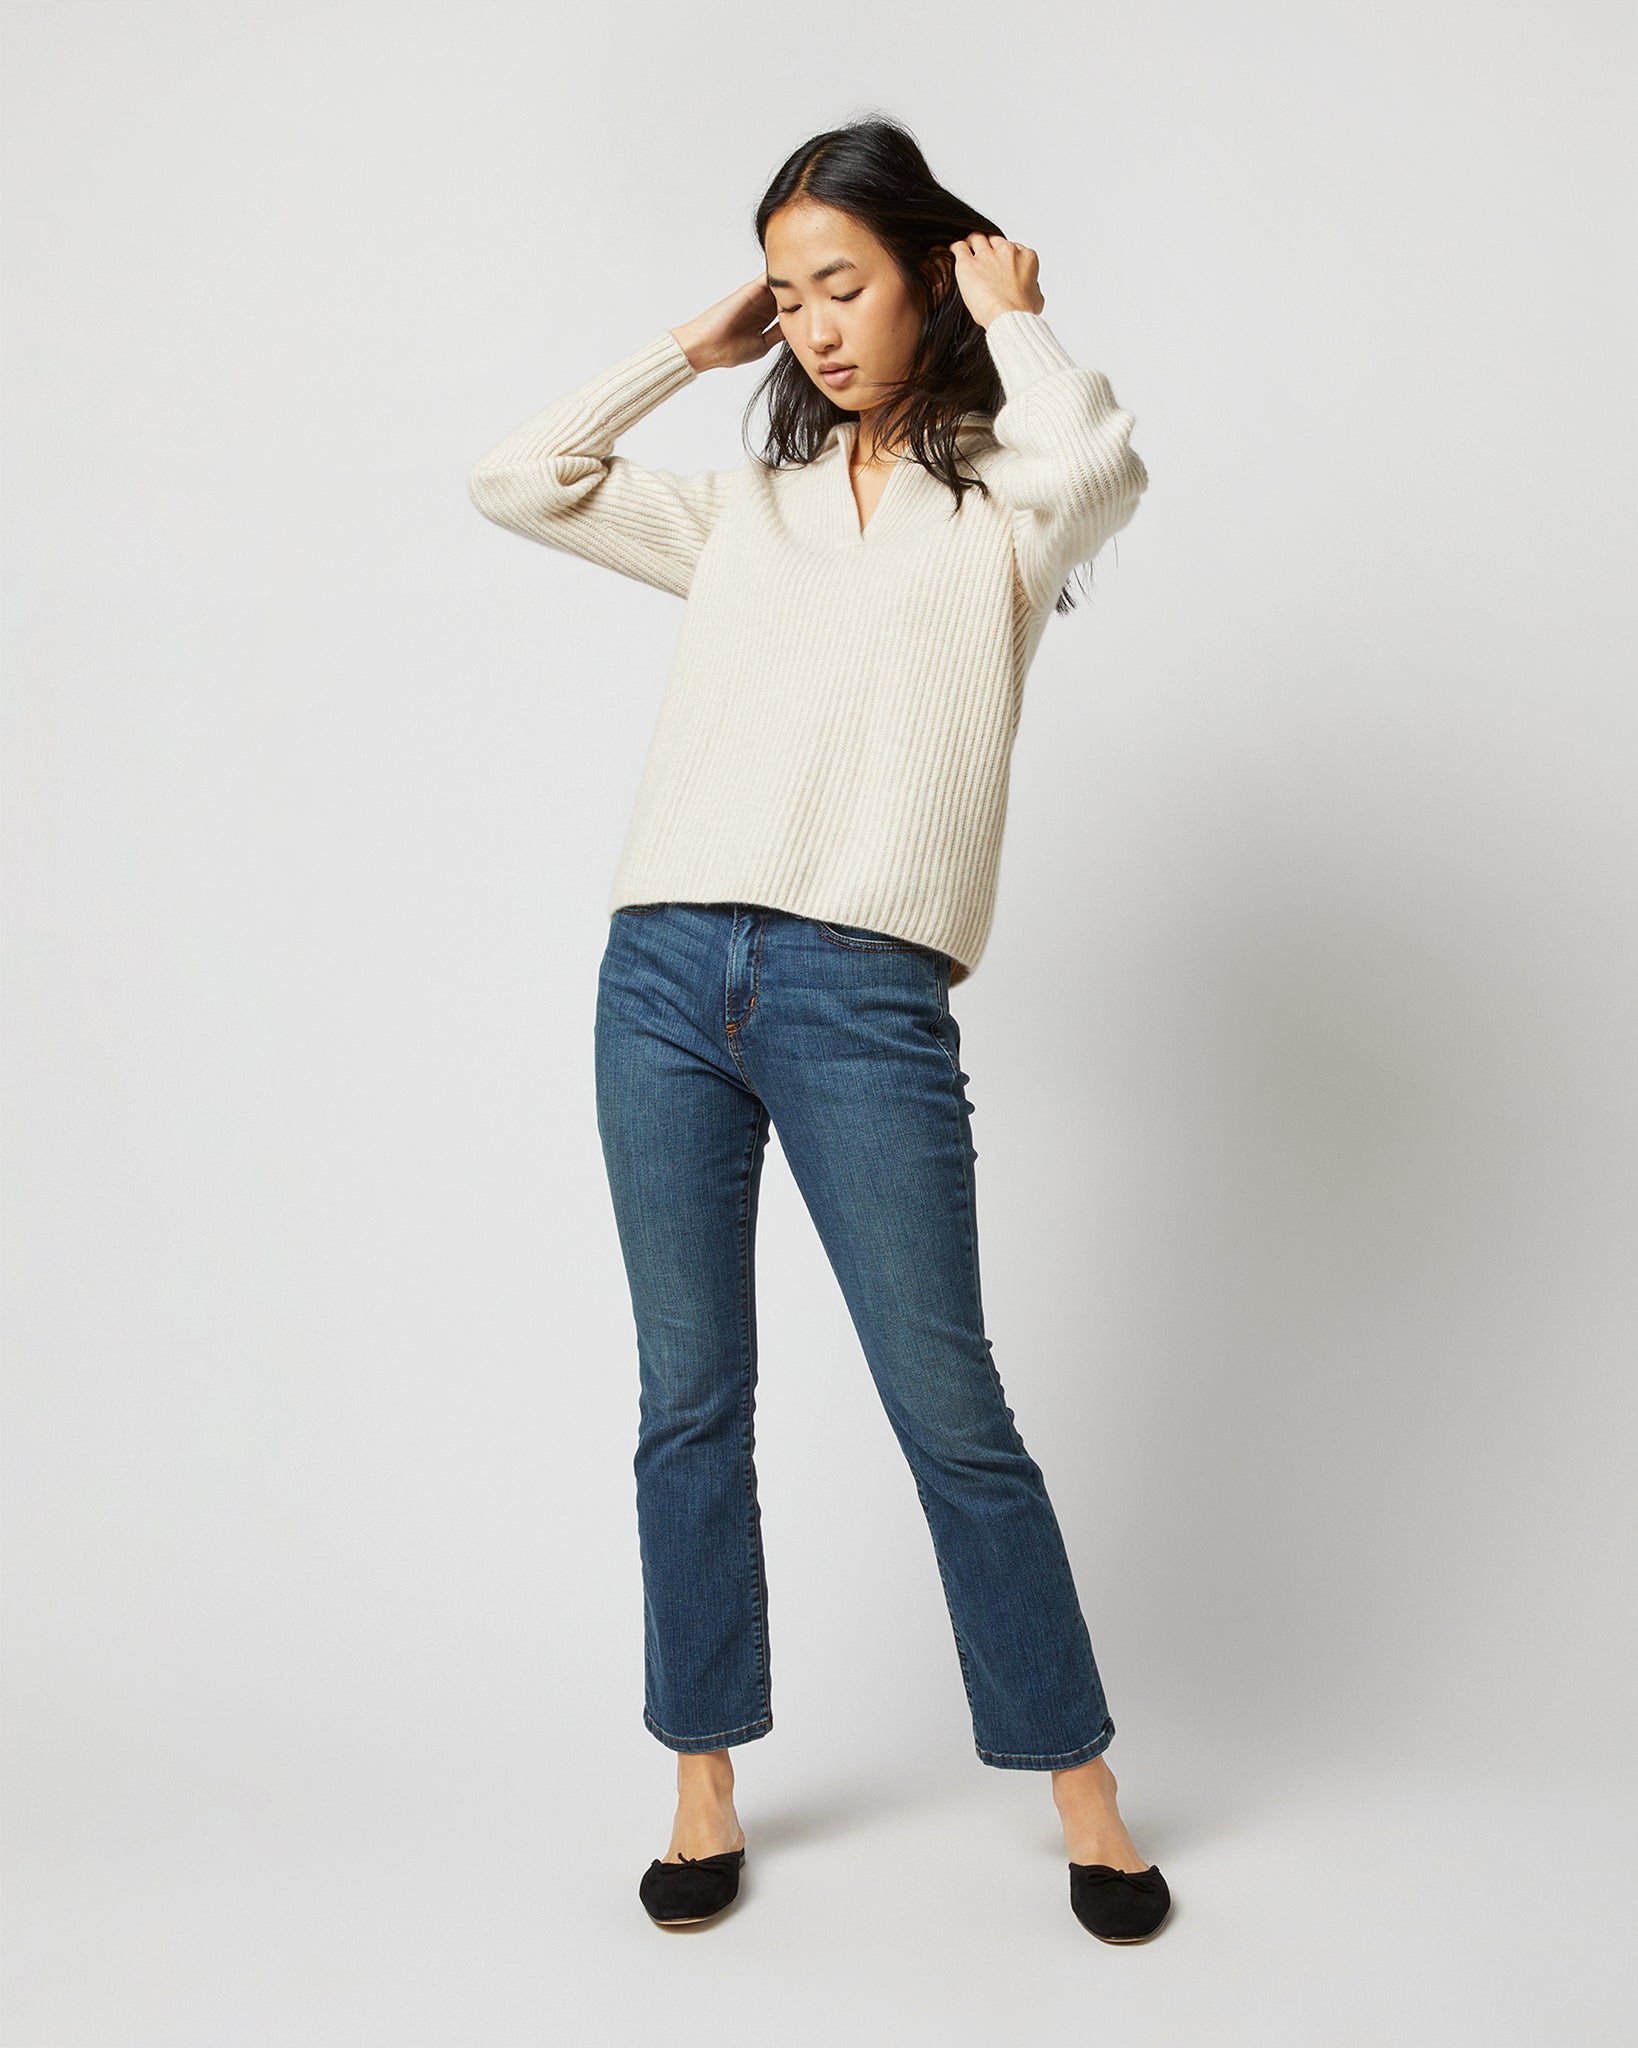 Blaire Johnny-Collar Shaker Sweater in Wheat Cashmere